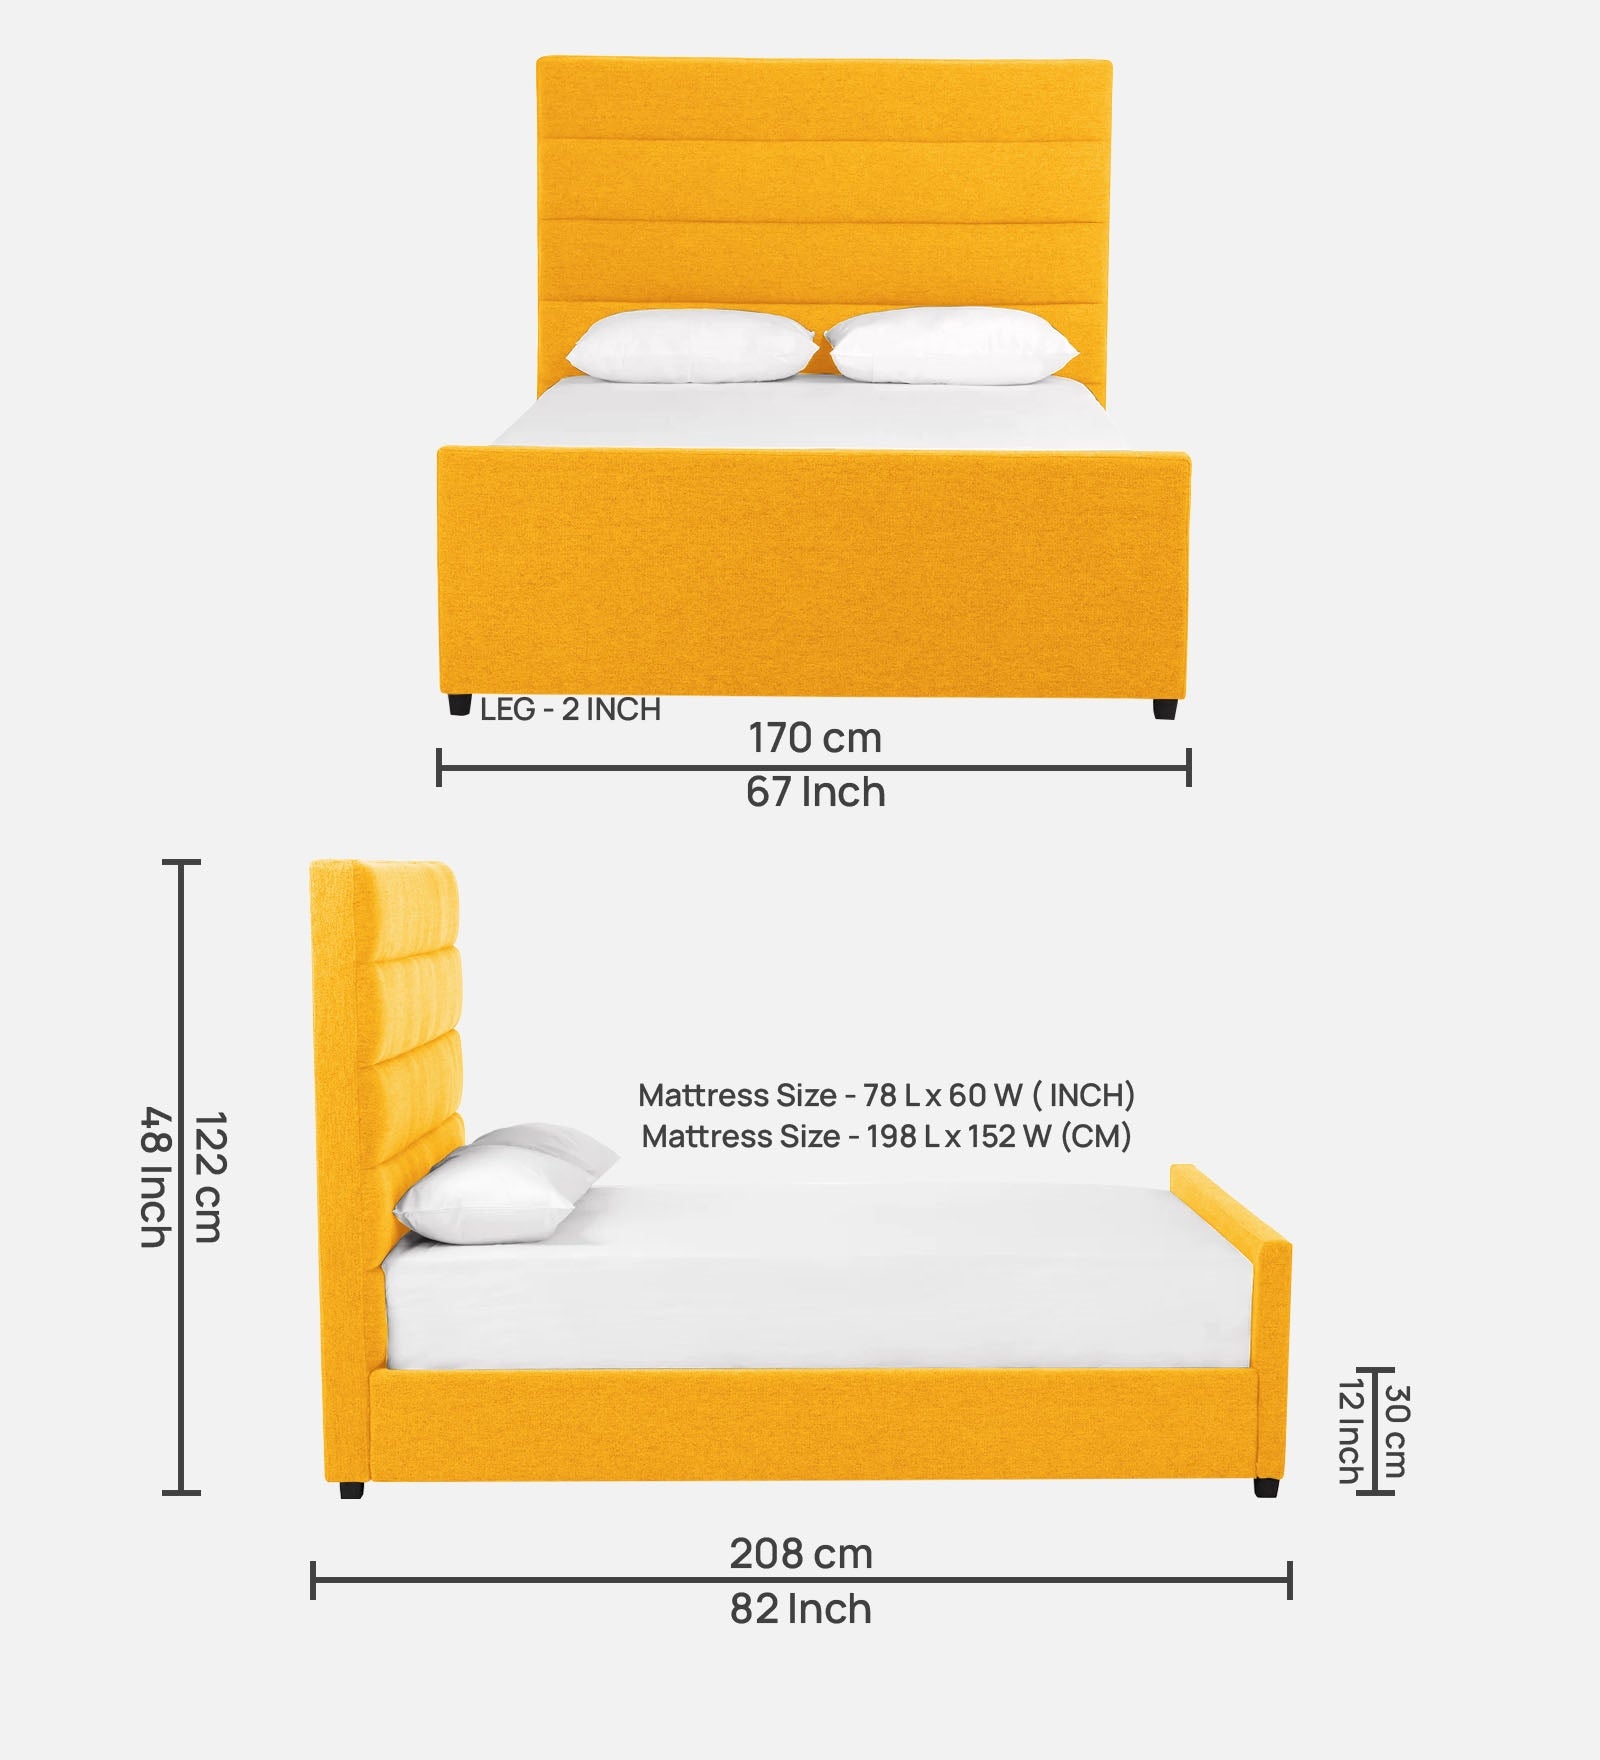 Pollen Fabric Queen Size Bed In Bold Yellow Colour